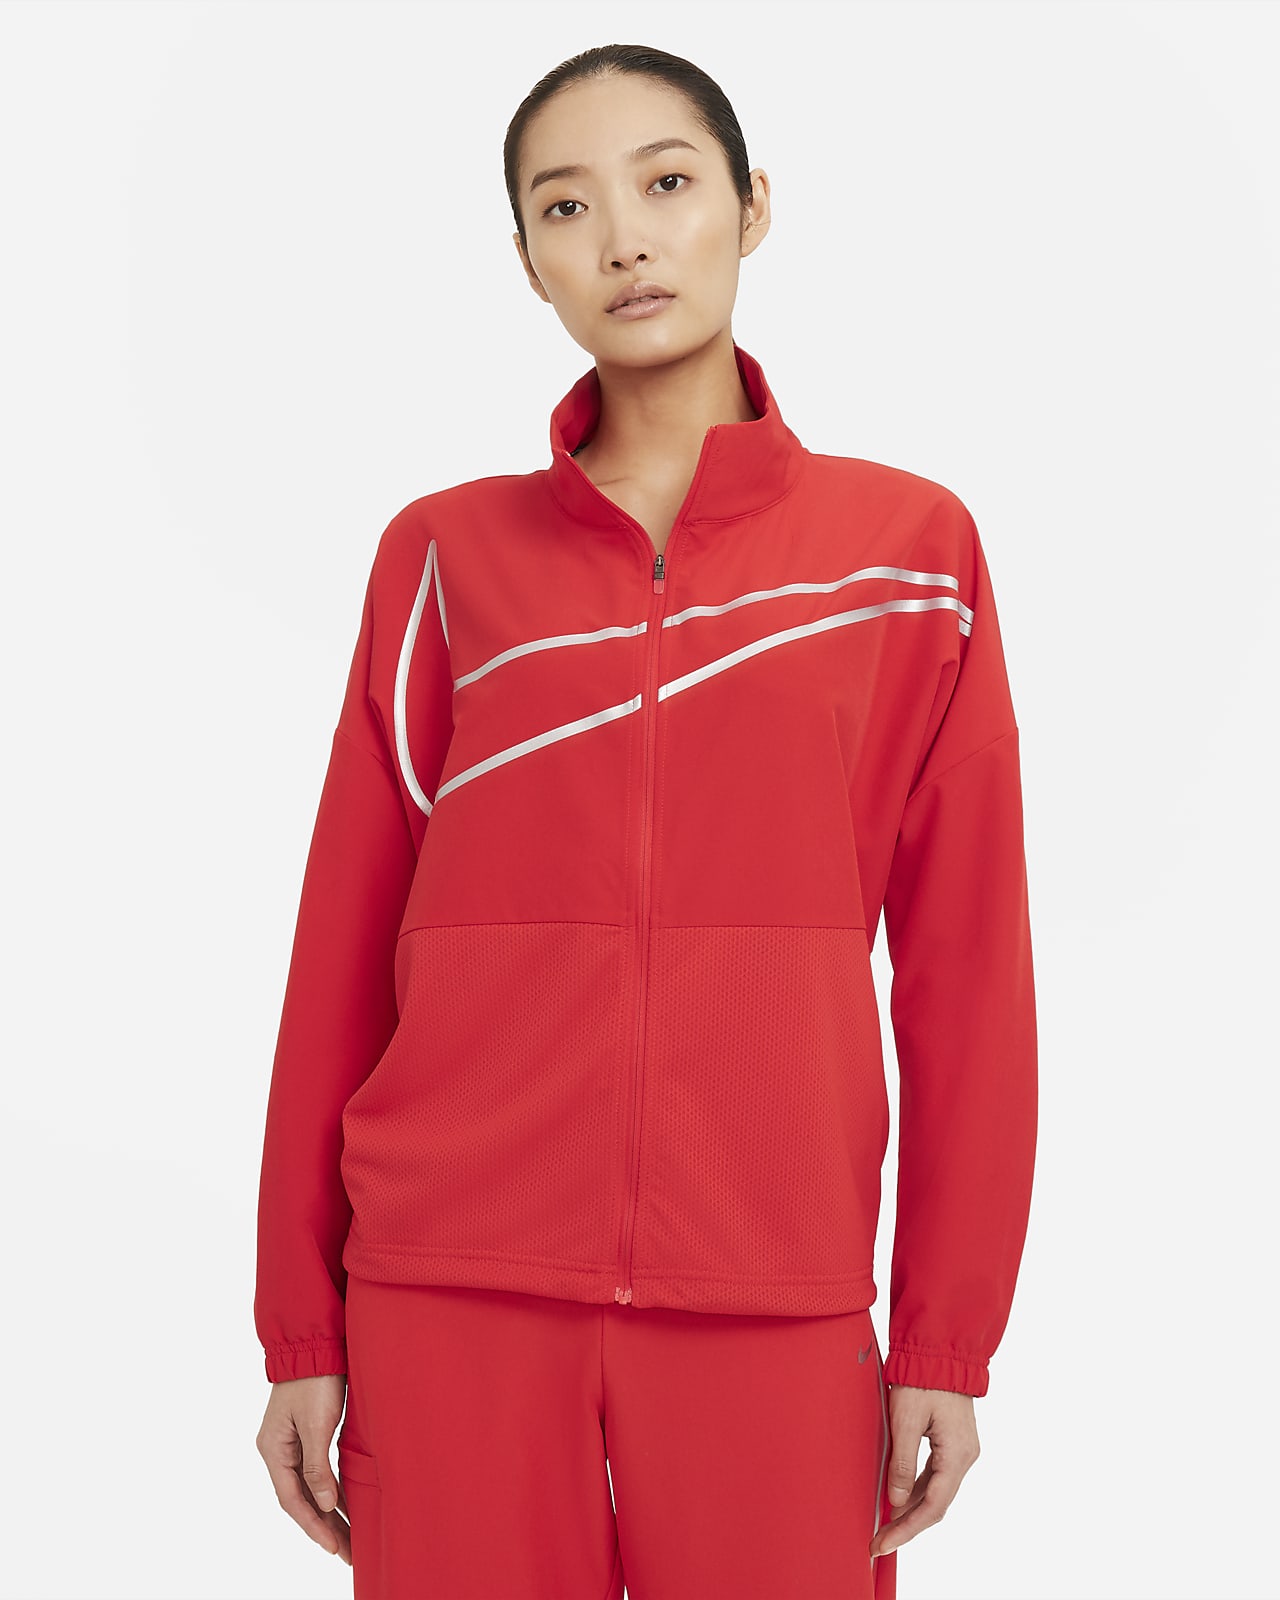 womens red nike top